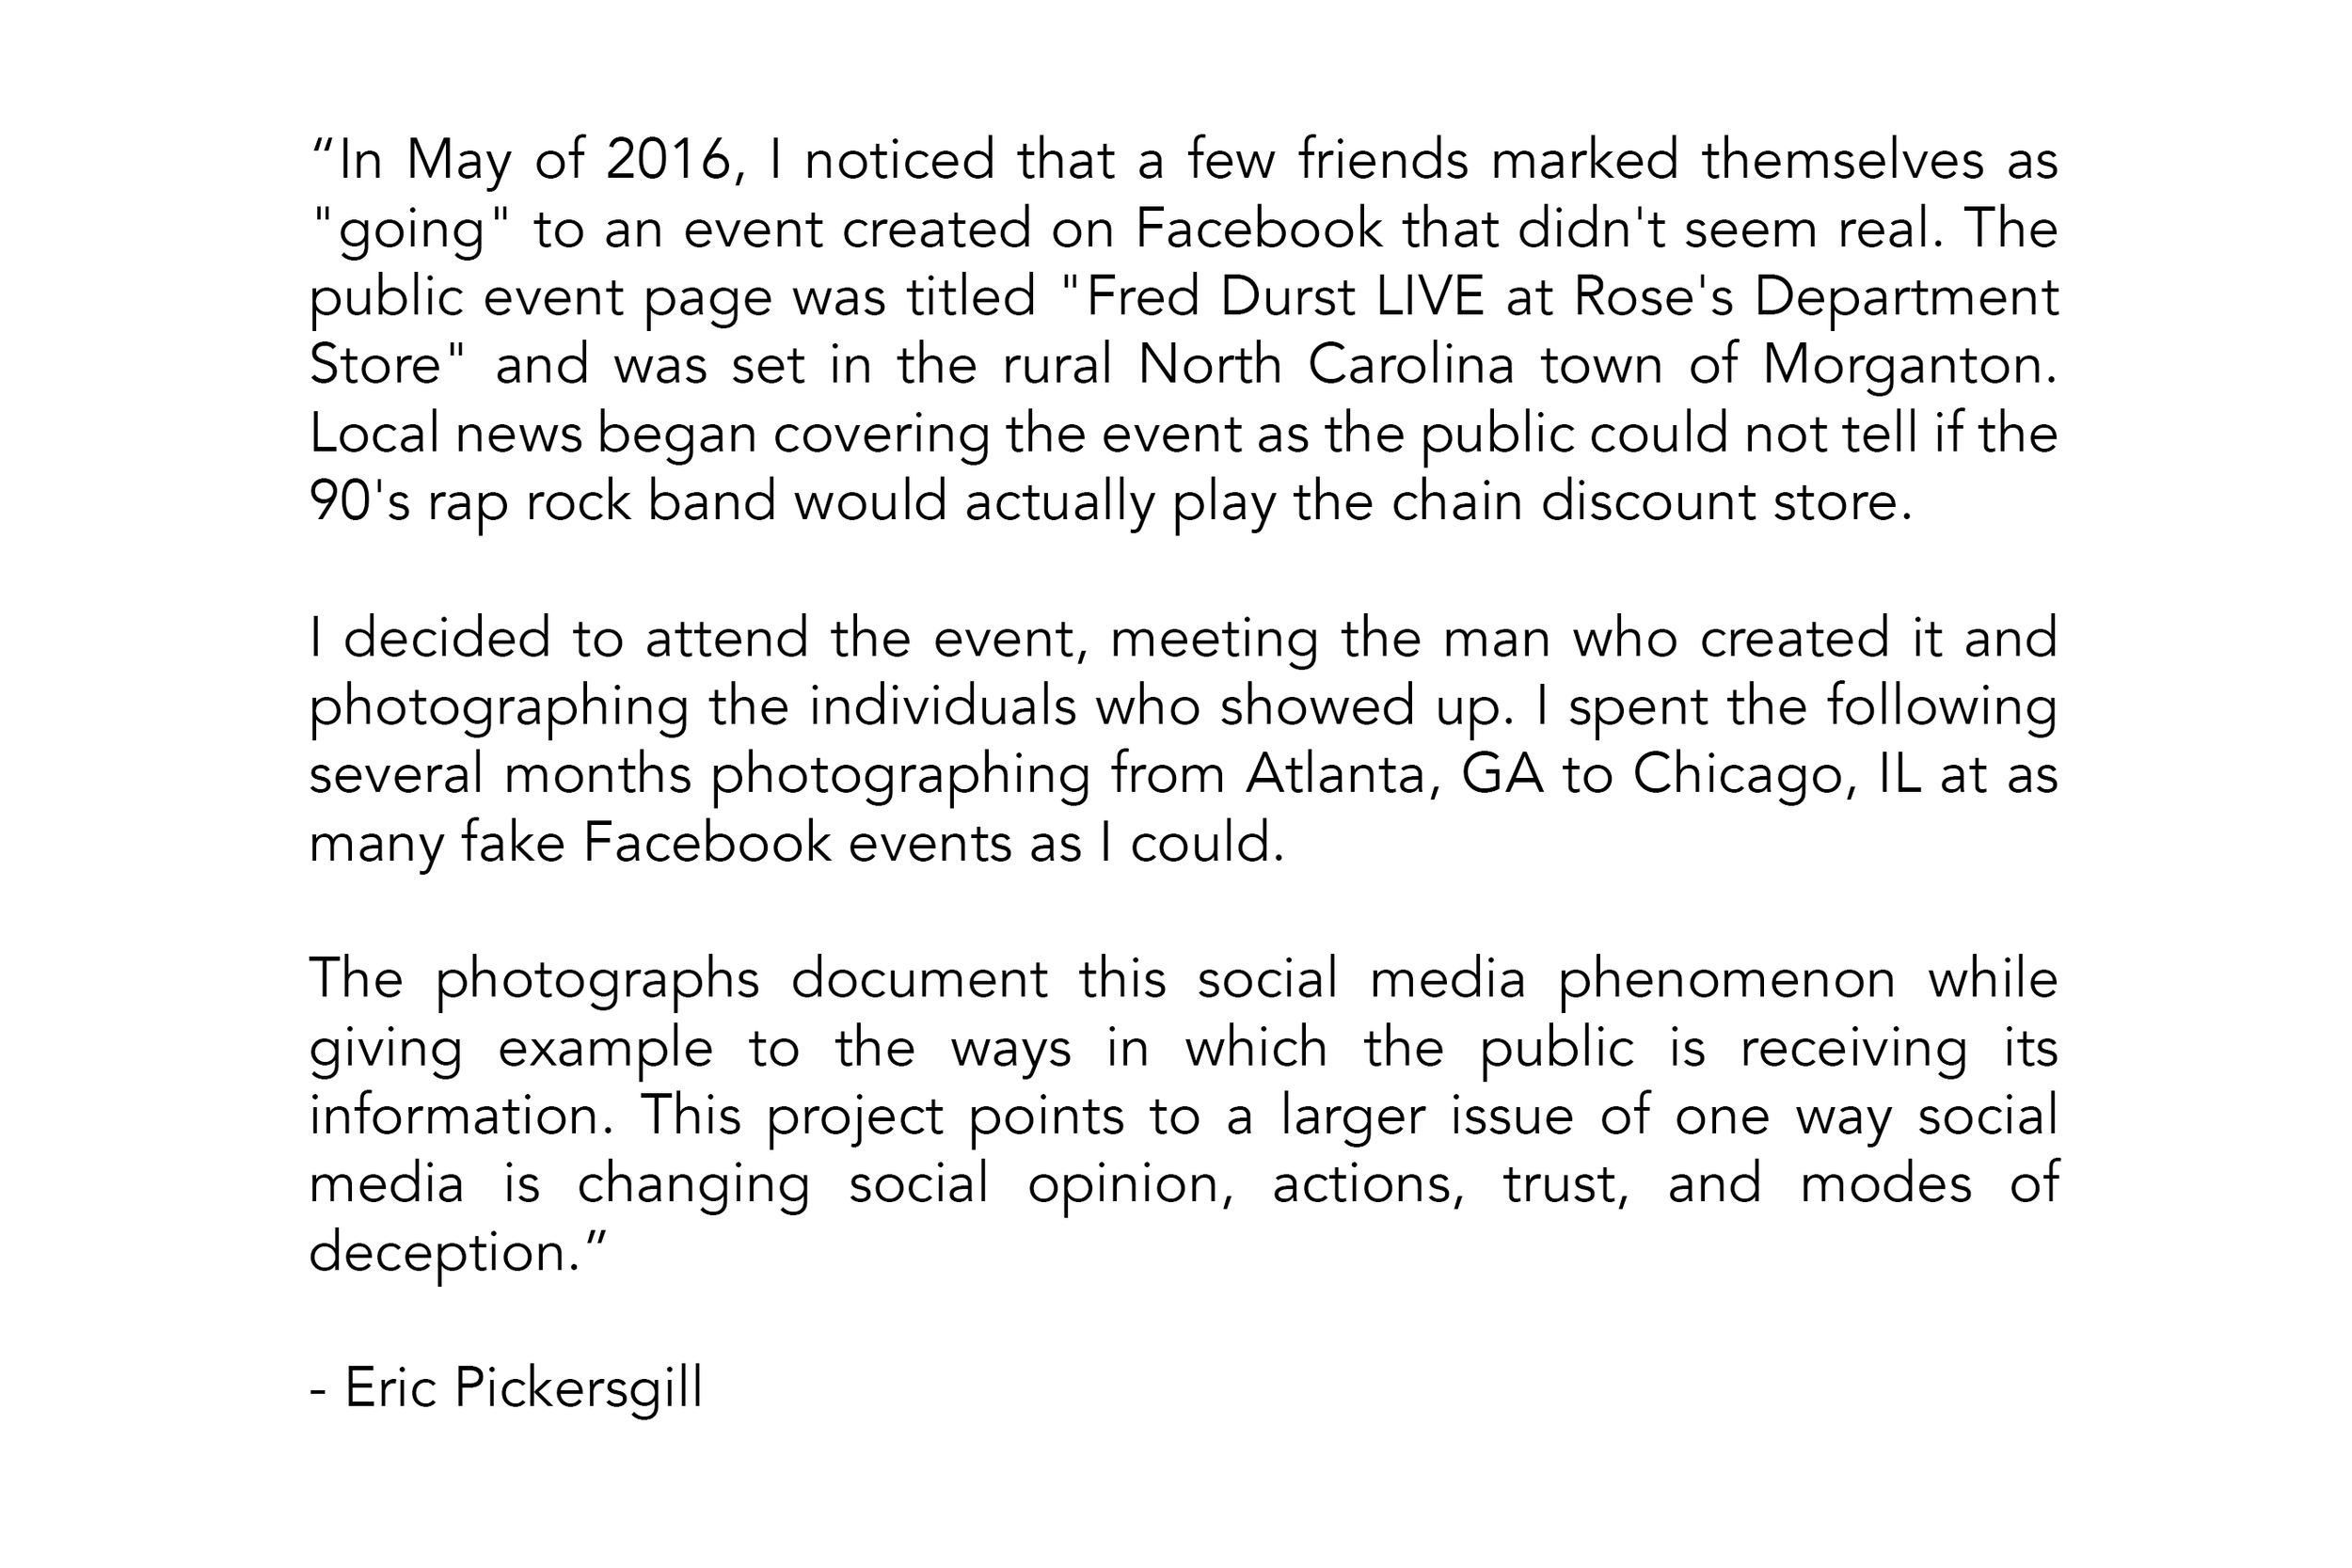 noshow-intro-eric-pickersgill-photography-fake-facebook-events.png